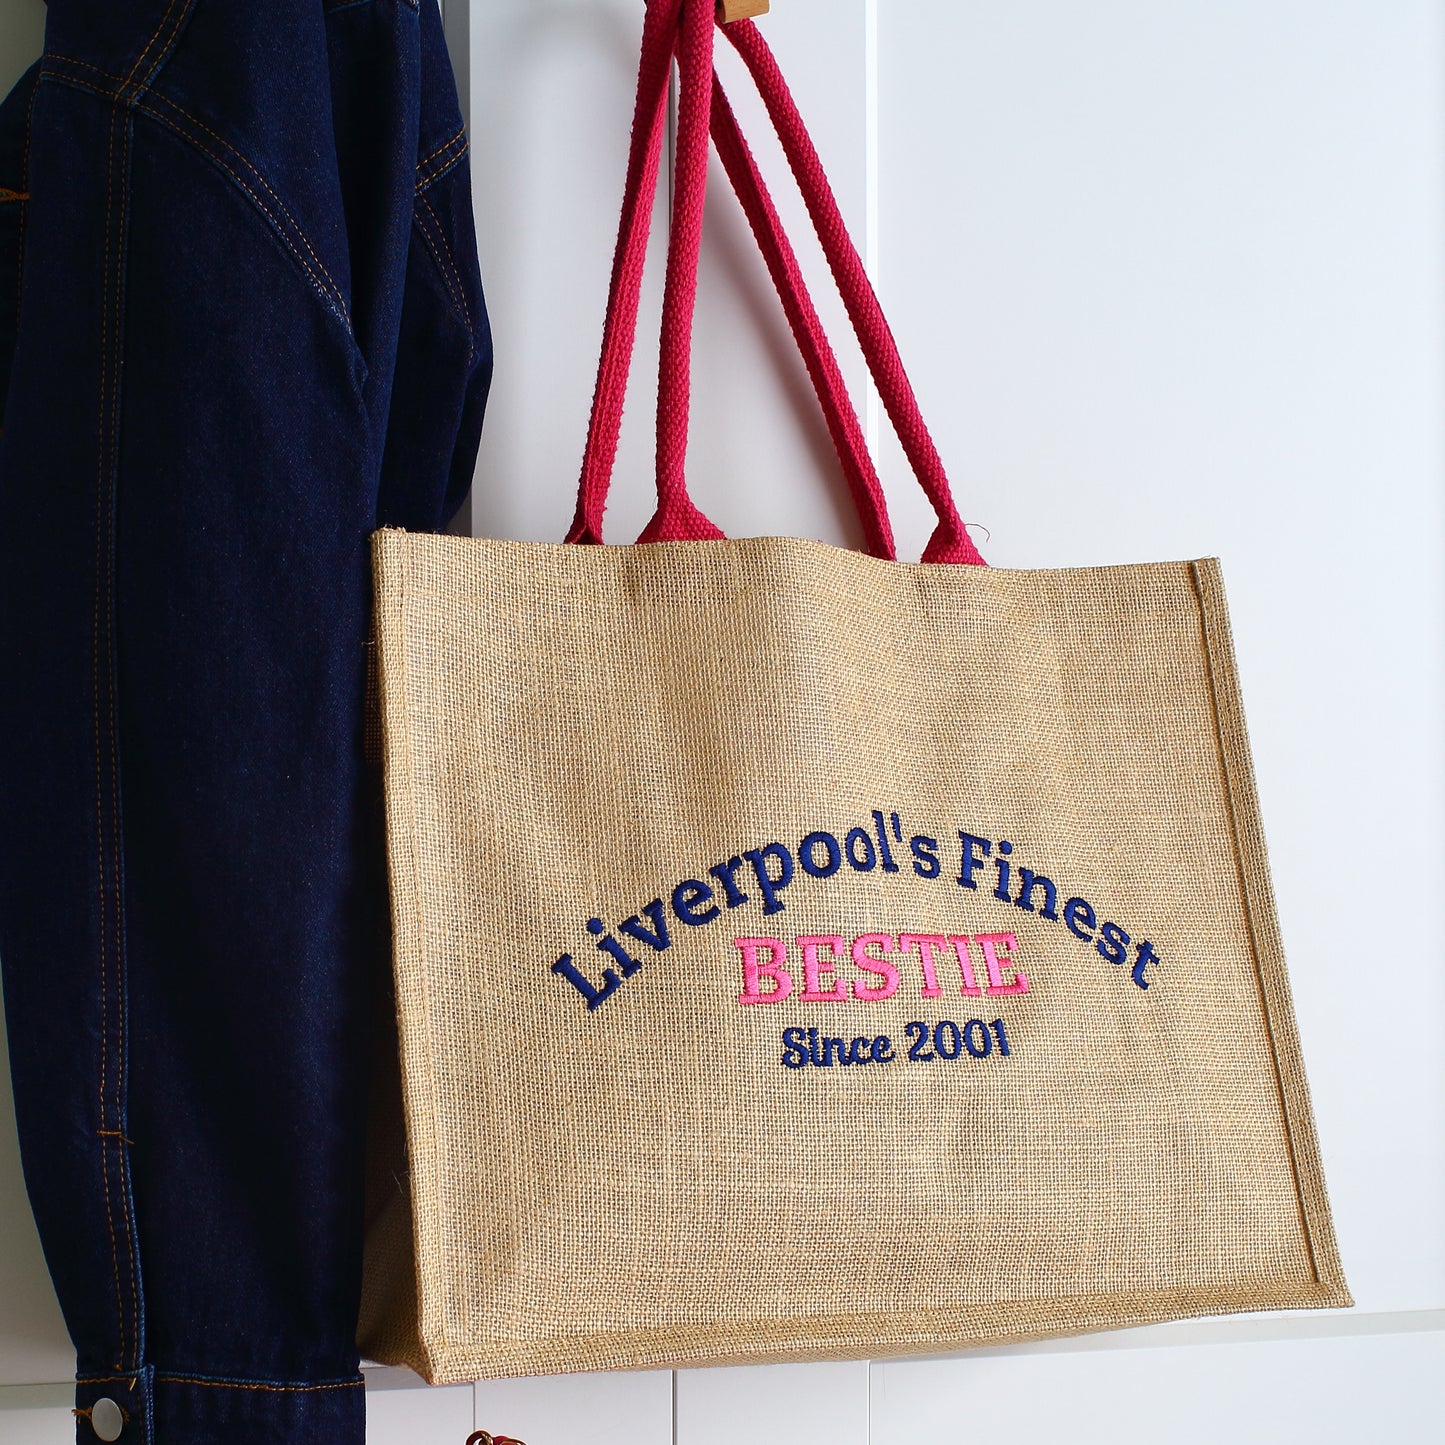 NEW - Embroidered Finest... Bestie Tote Bag